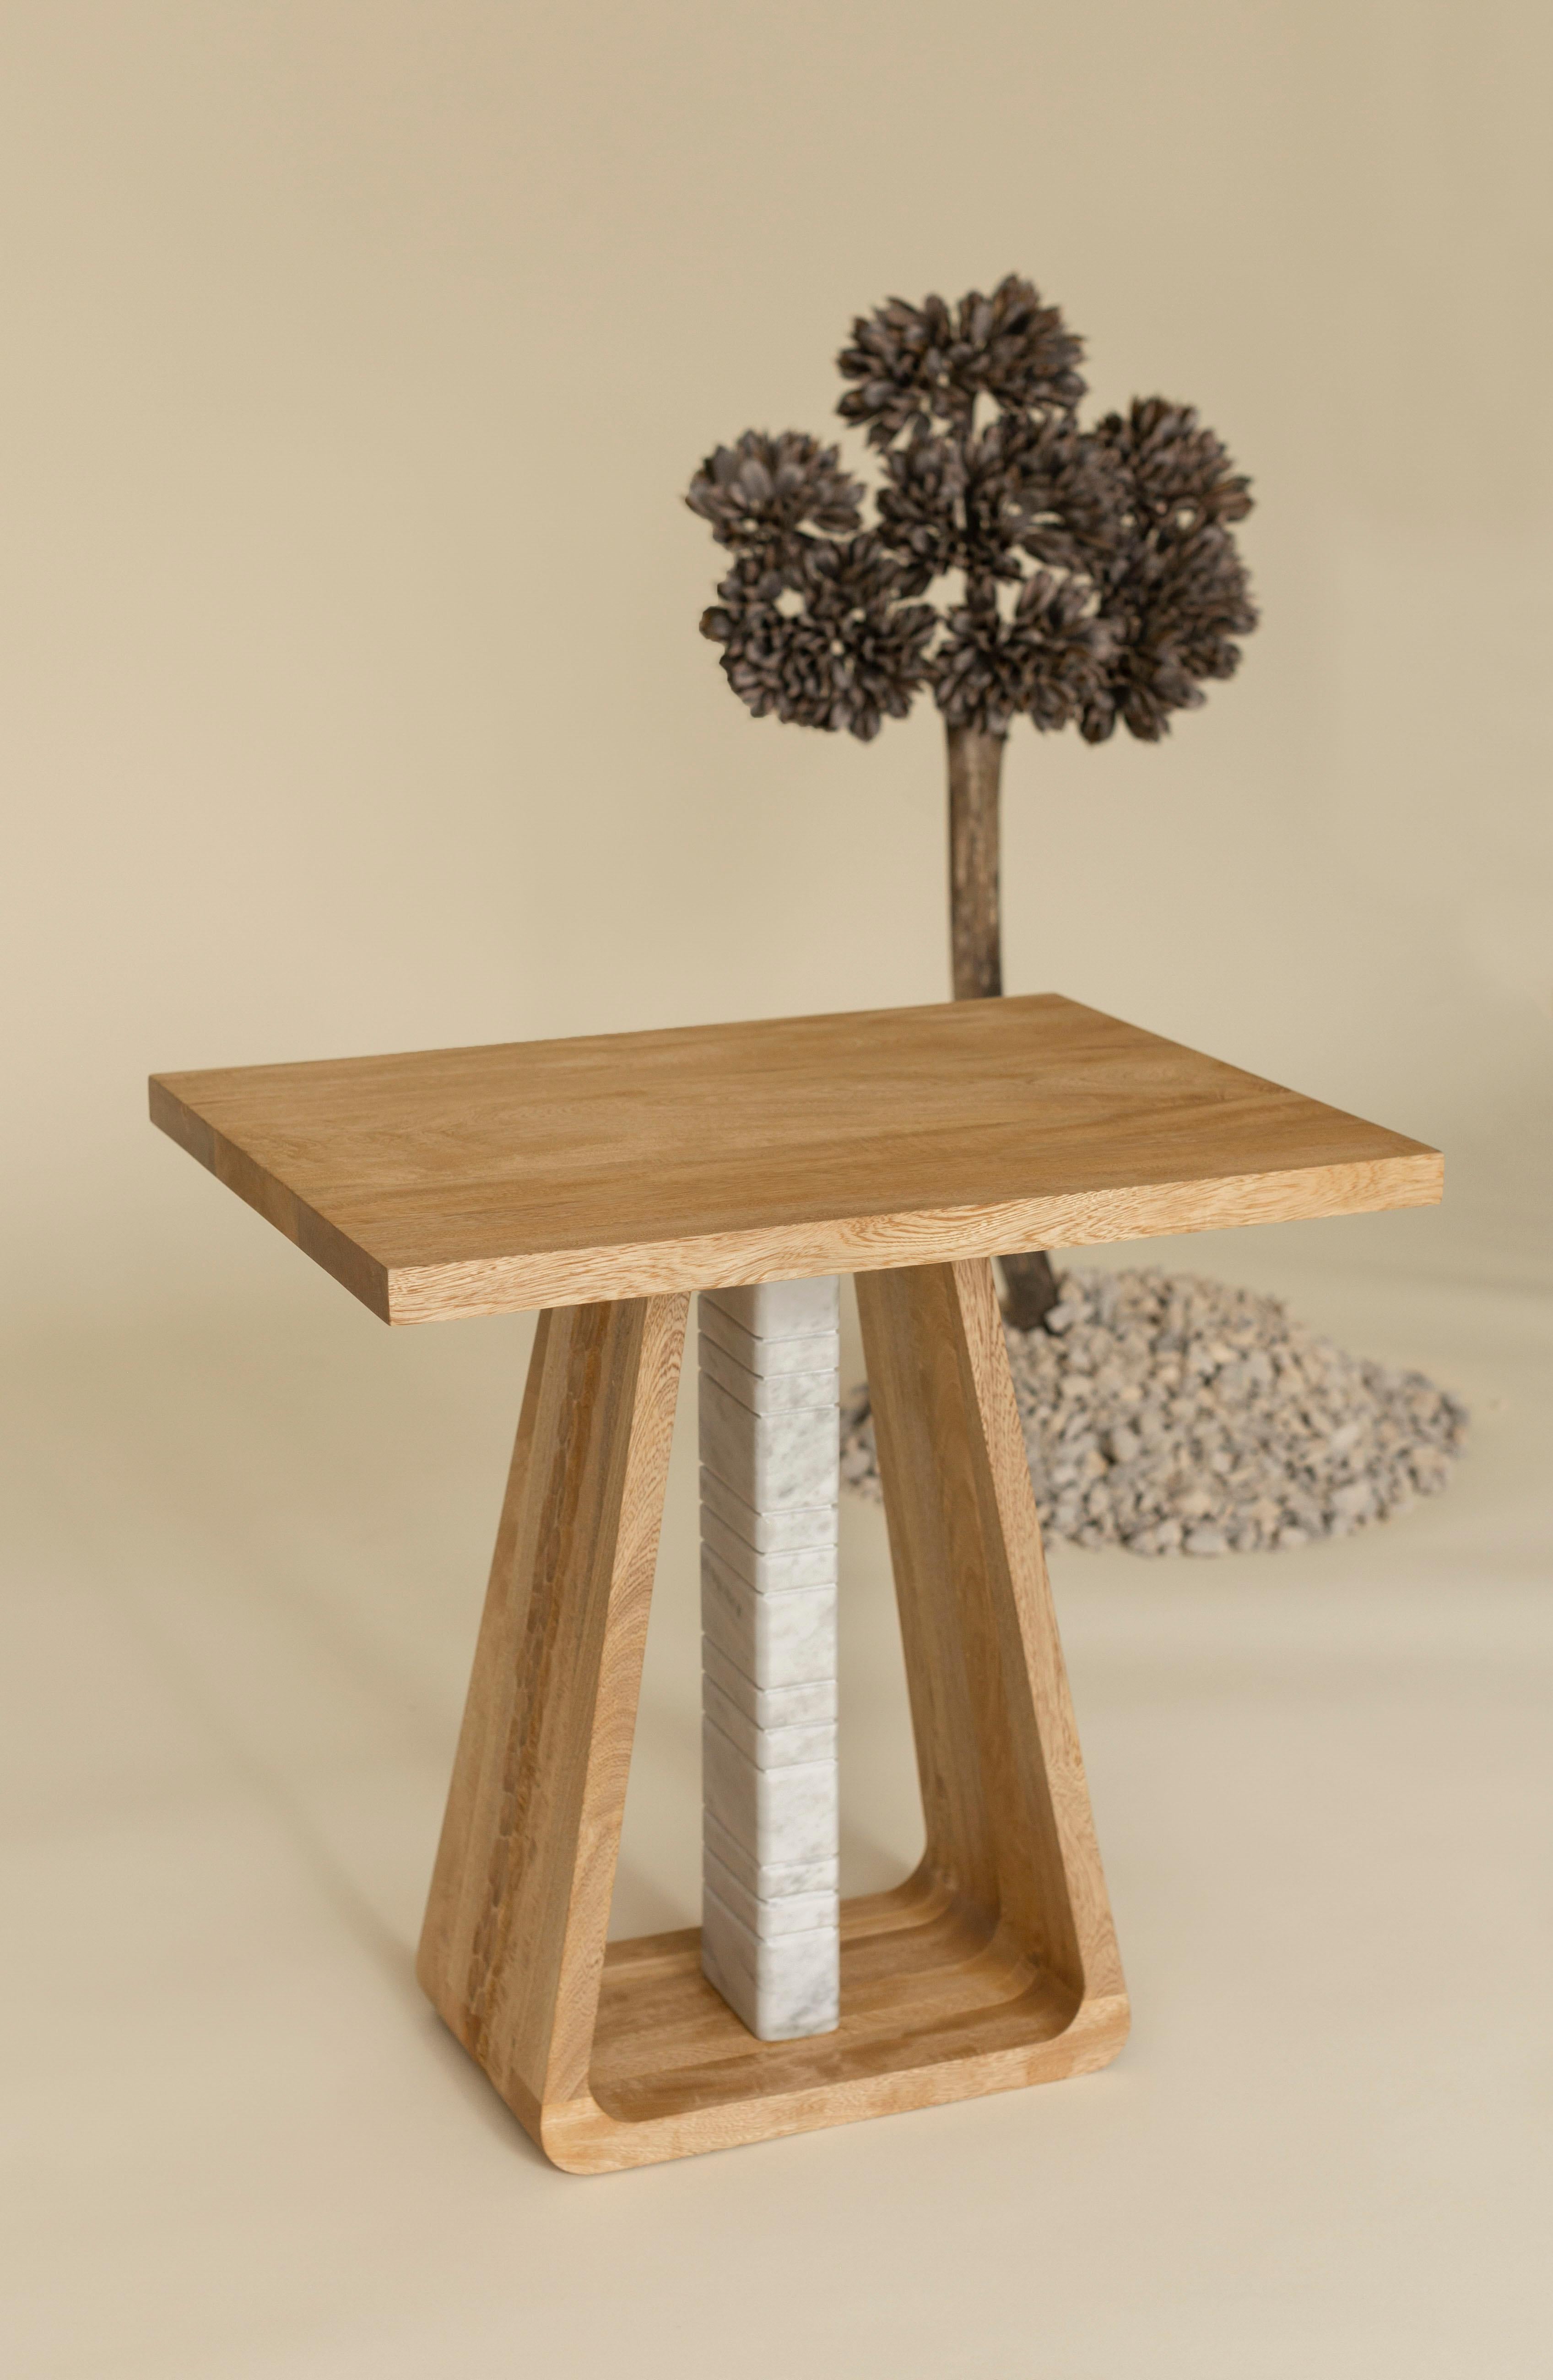 Hand-Crafted Thar (tall) in rosa morada wood and marble center by Tana Karei For Sale